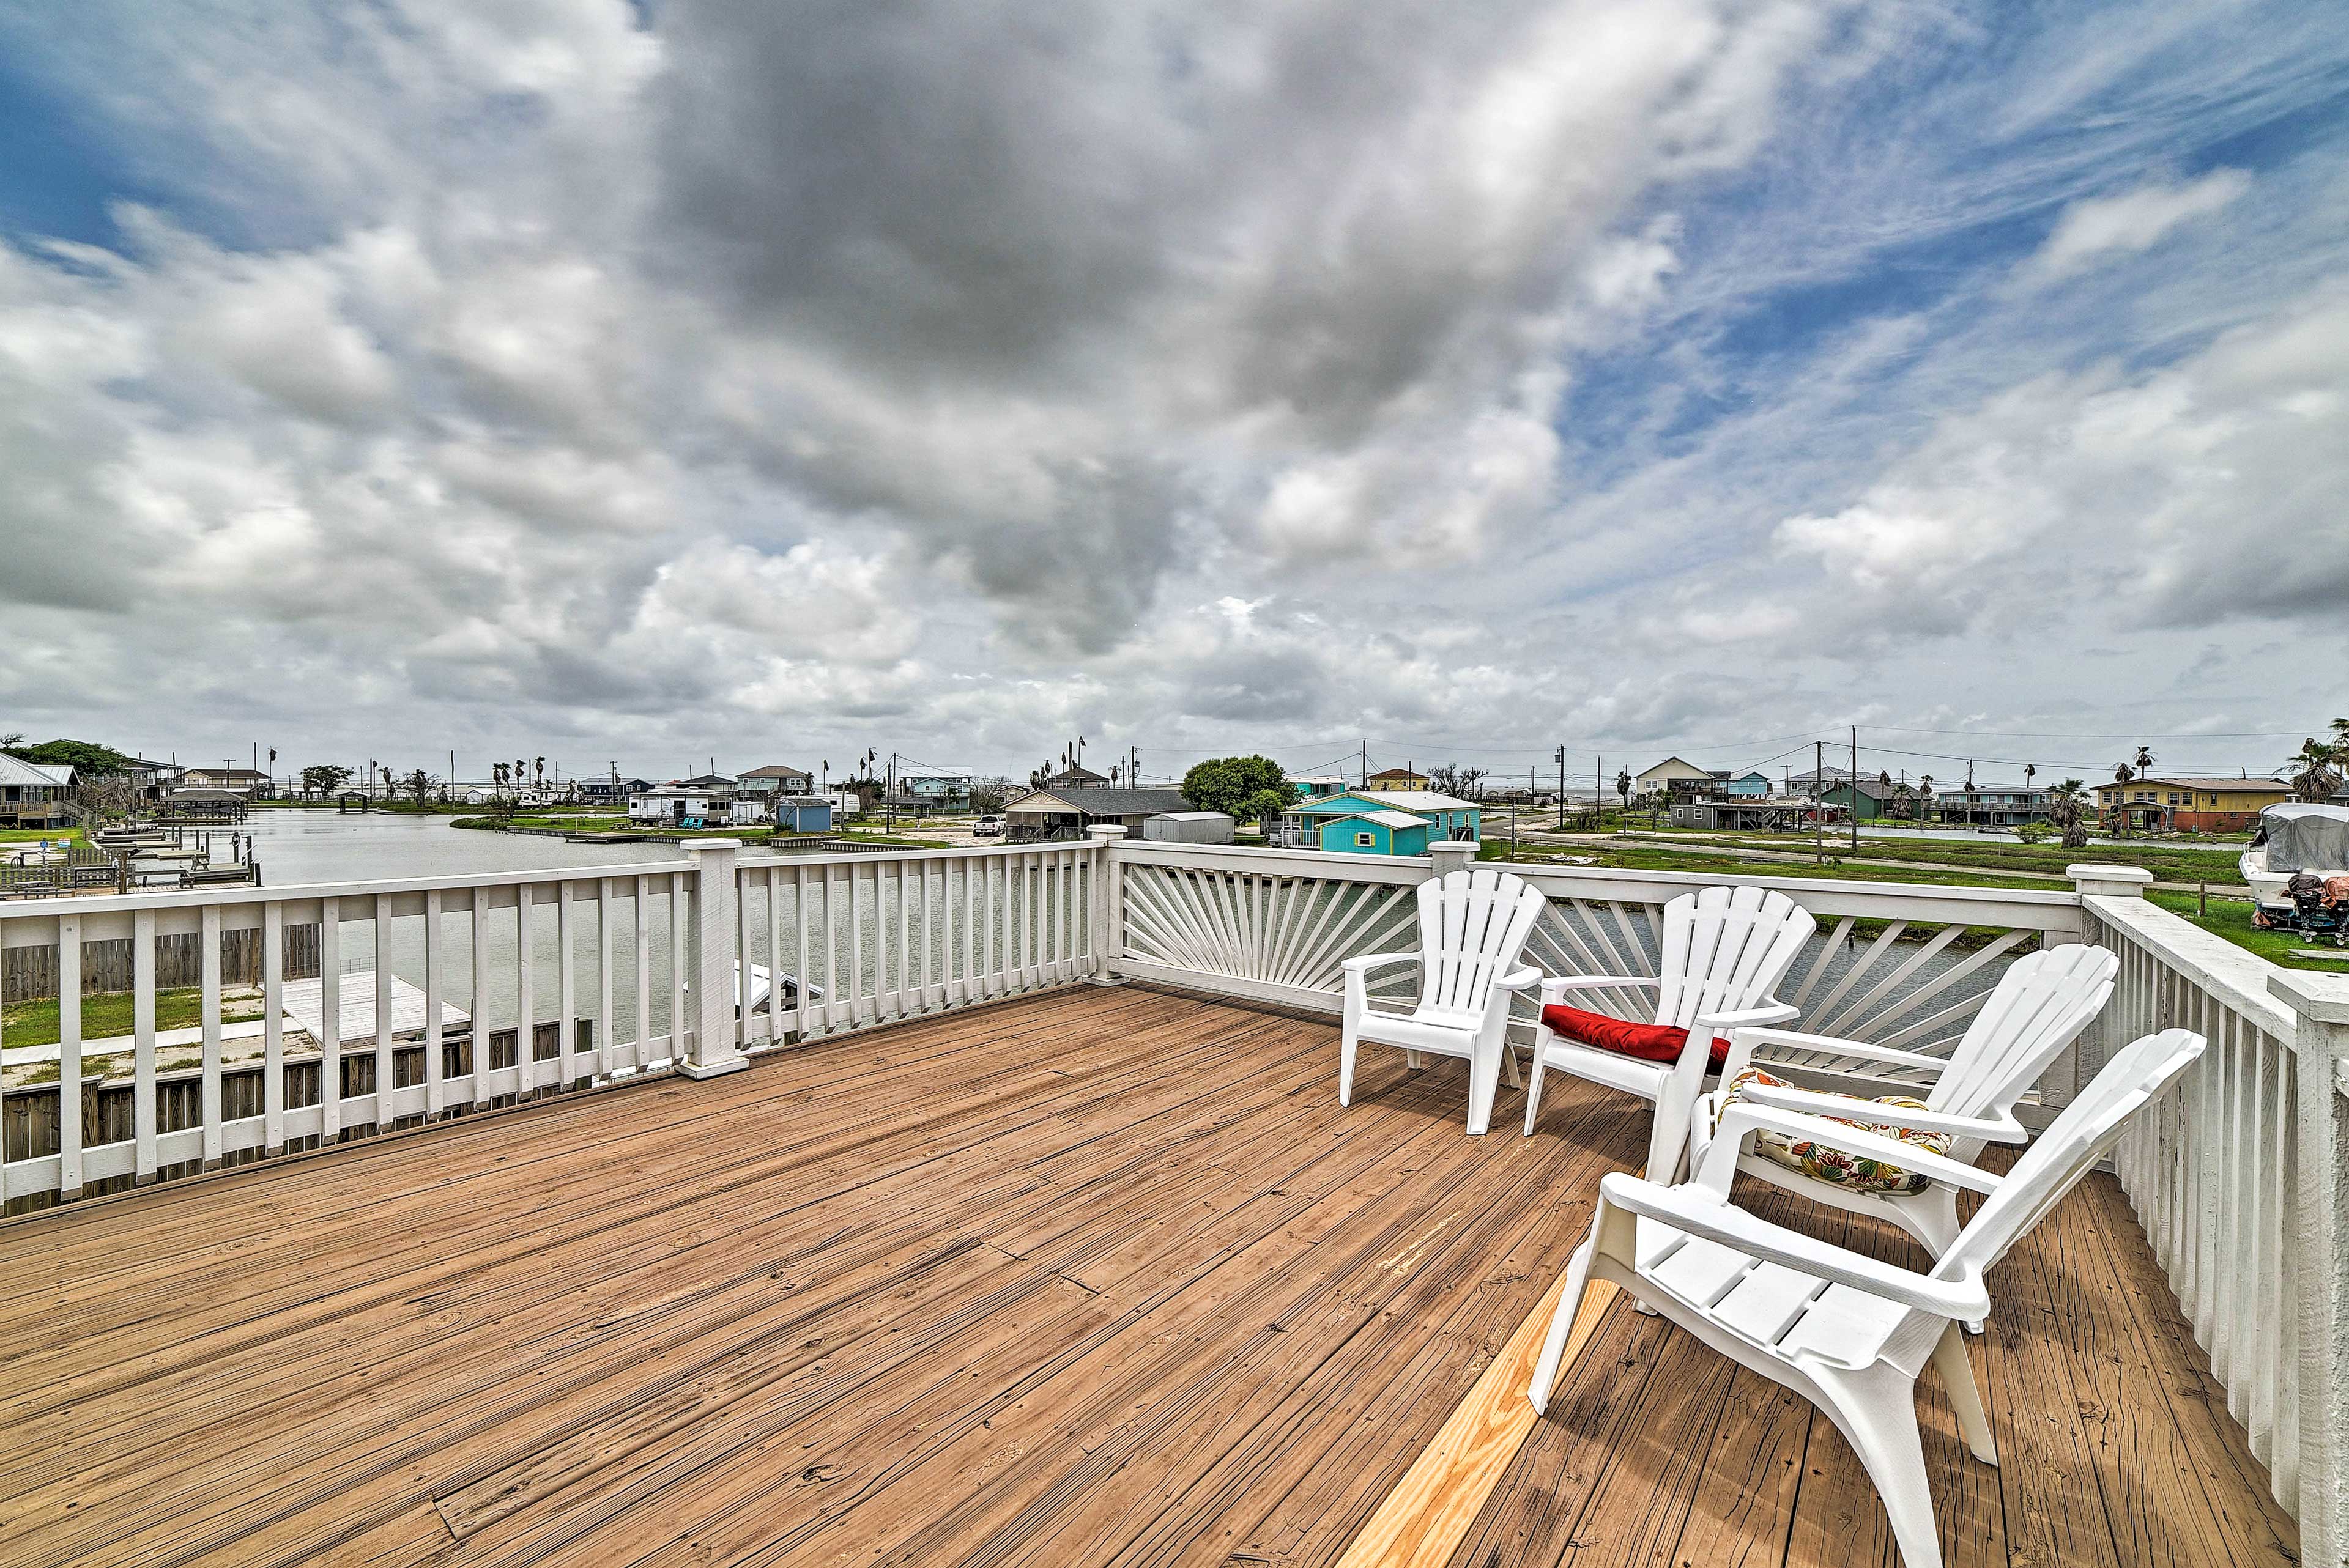 Private Deck | Stairs Required to Access | Pet Friendly w/ Fee